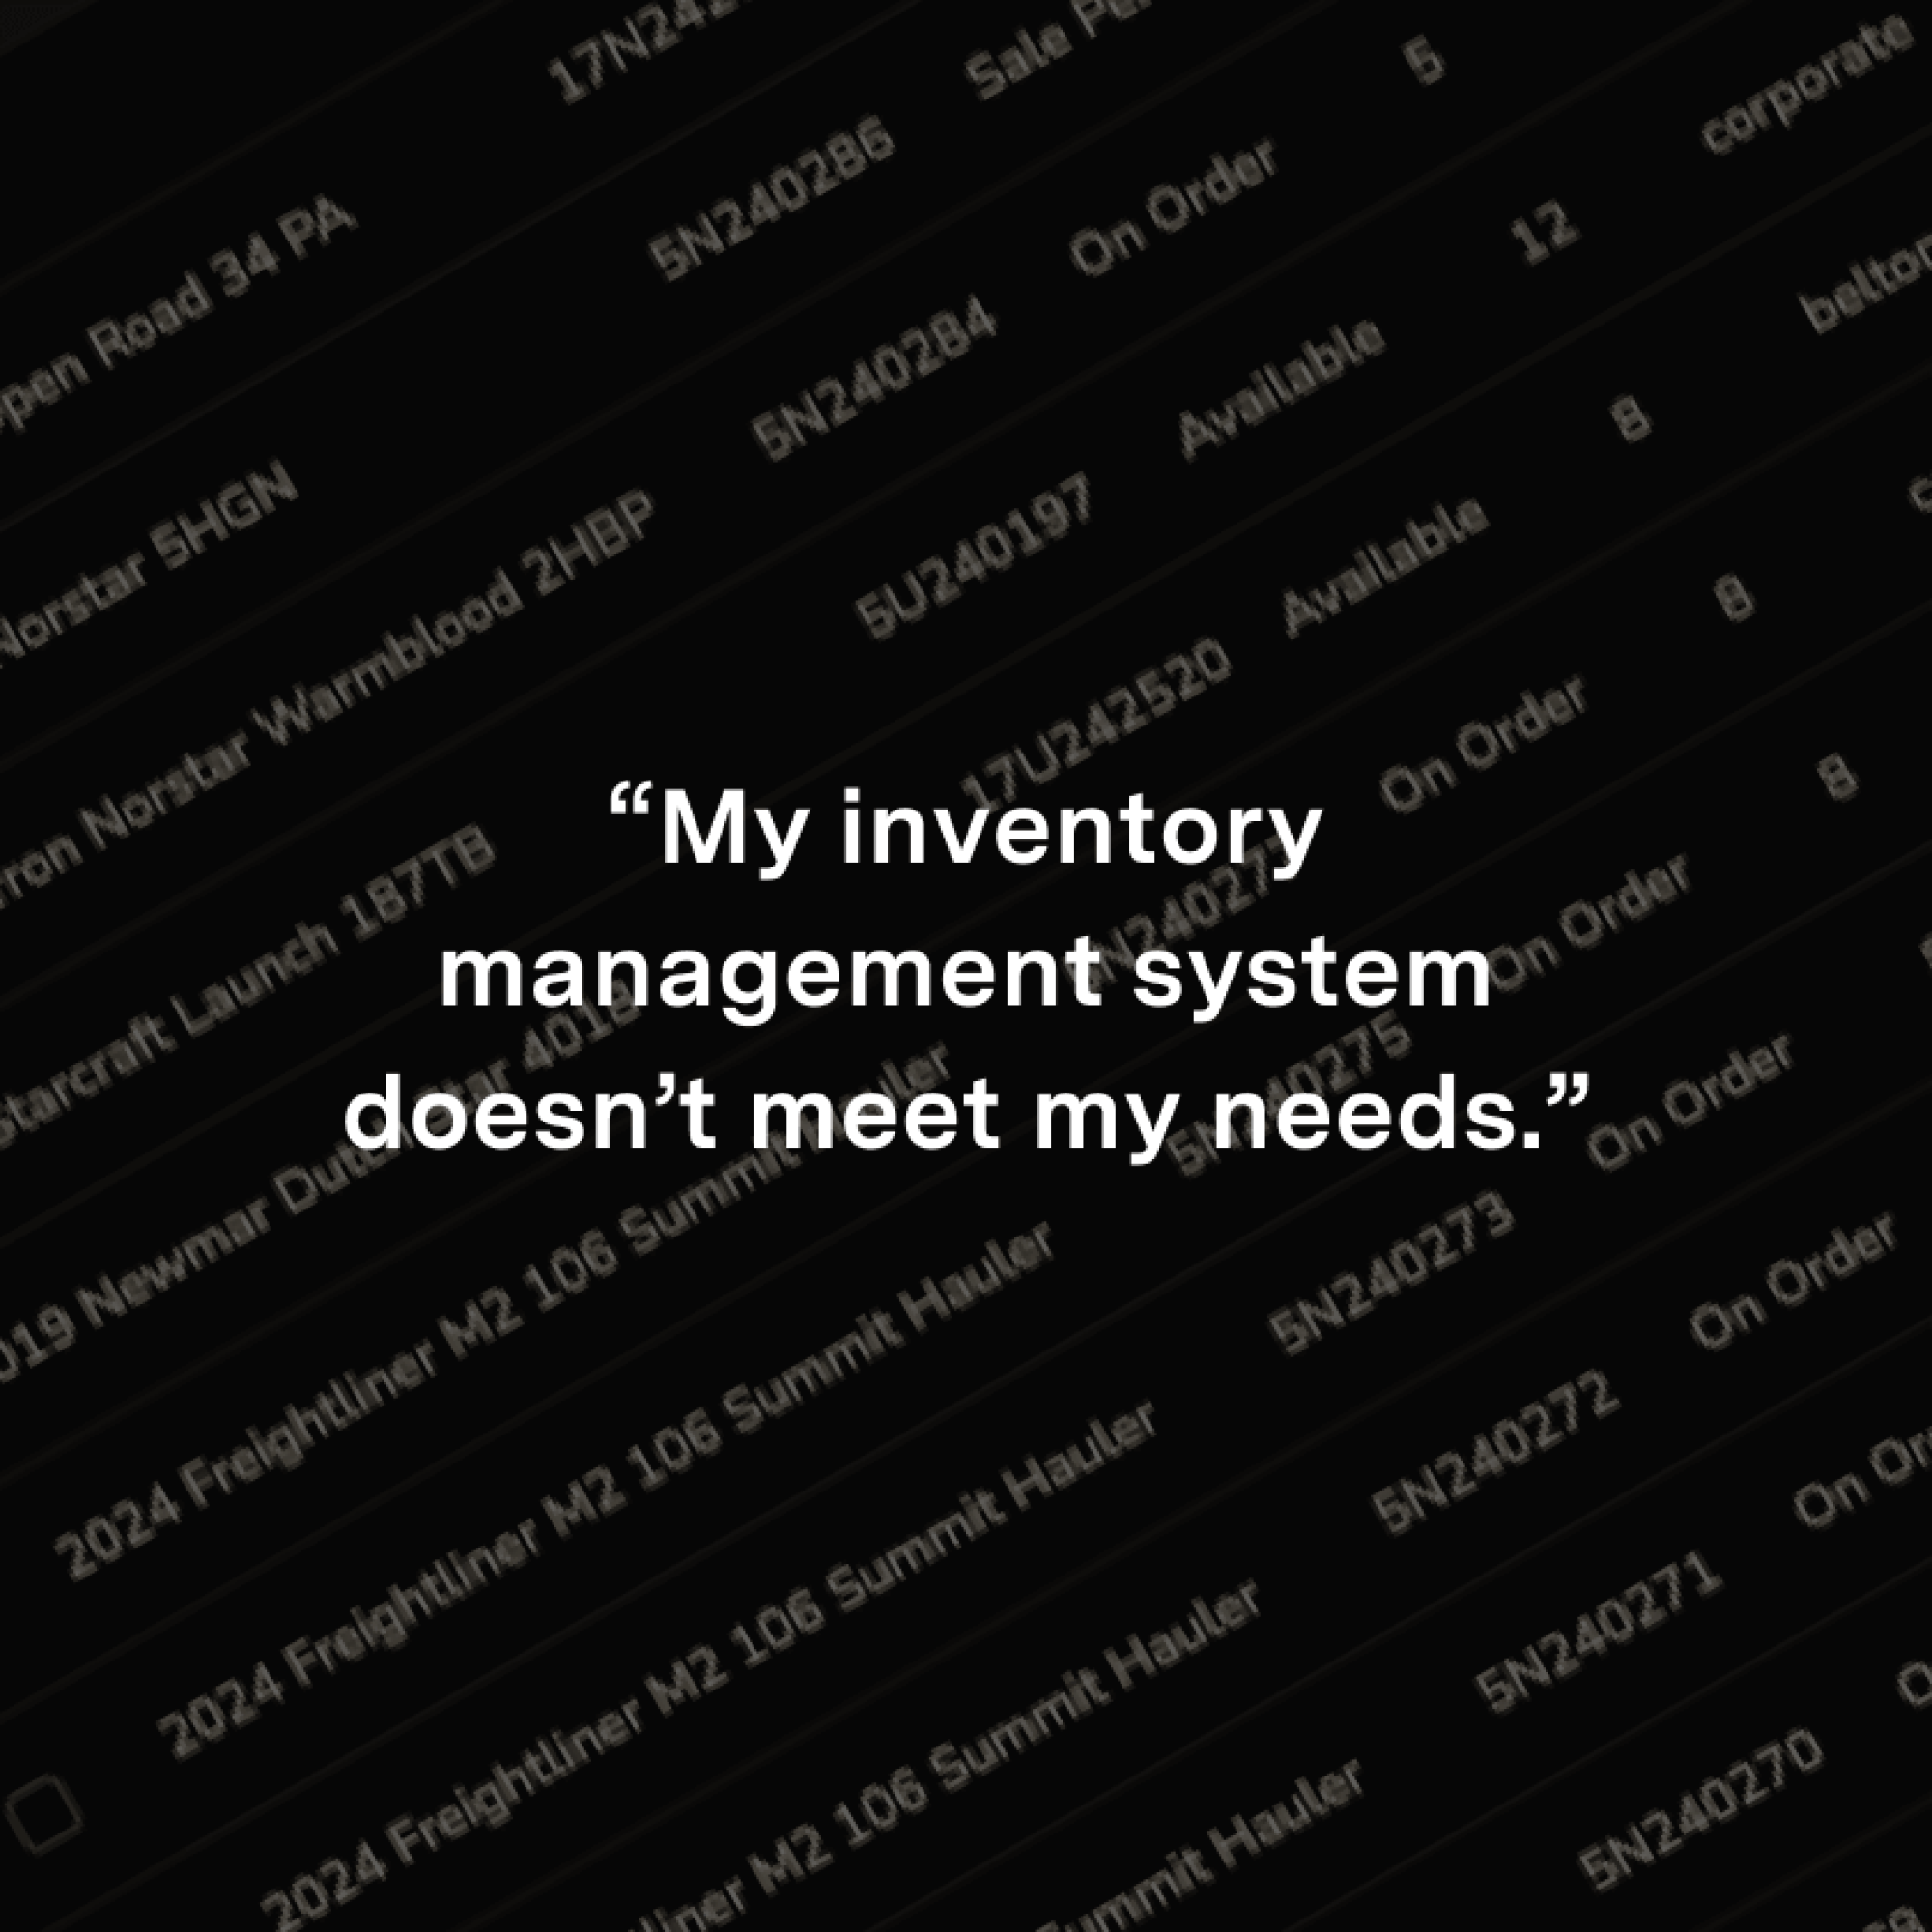 My inventory management system doesn’t meet my needs.